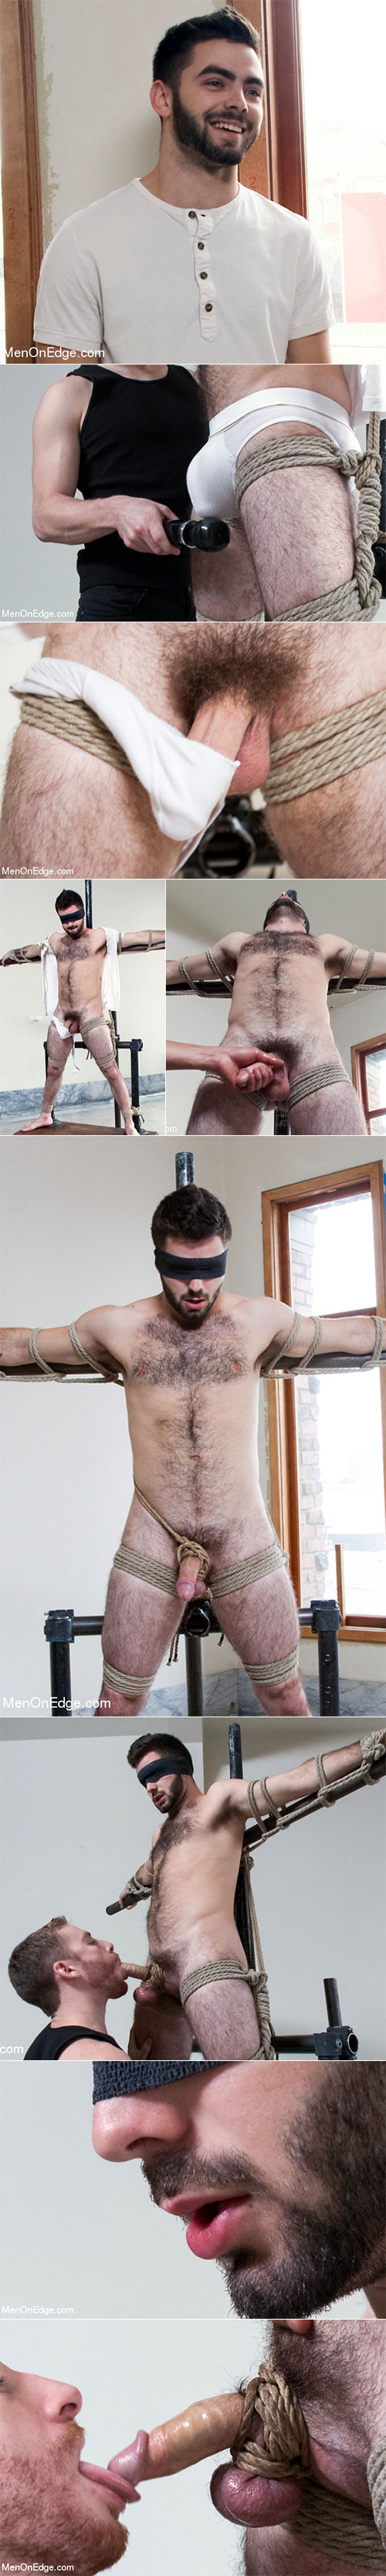 MenOnEdge: Hairy stud Josh Long tied up and edged for the first time